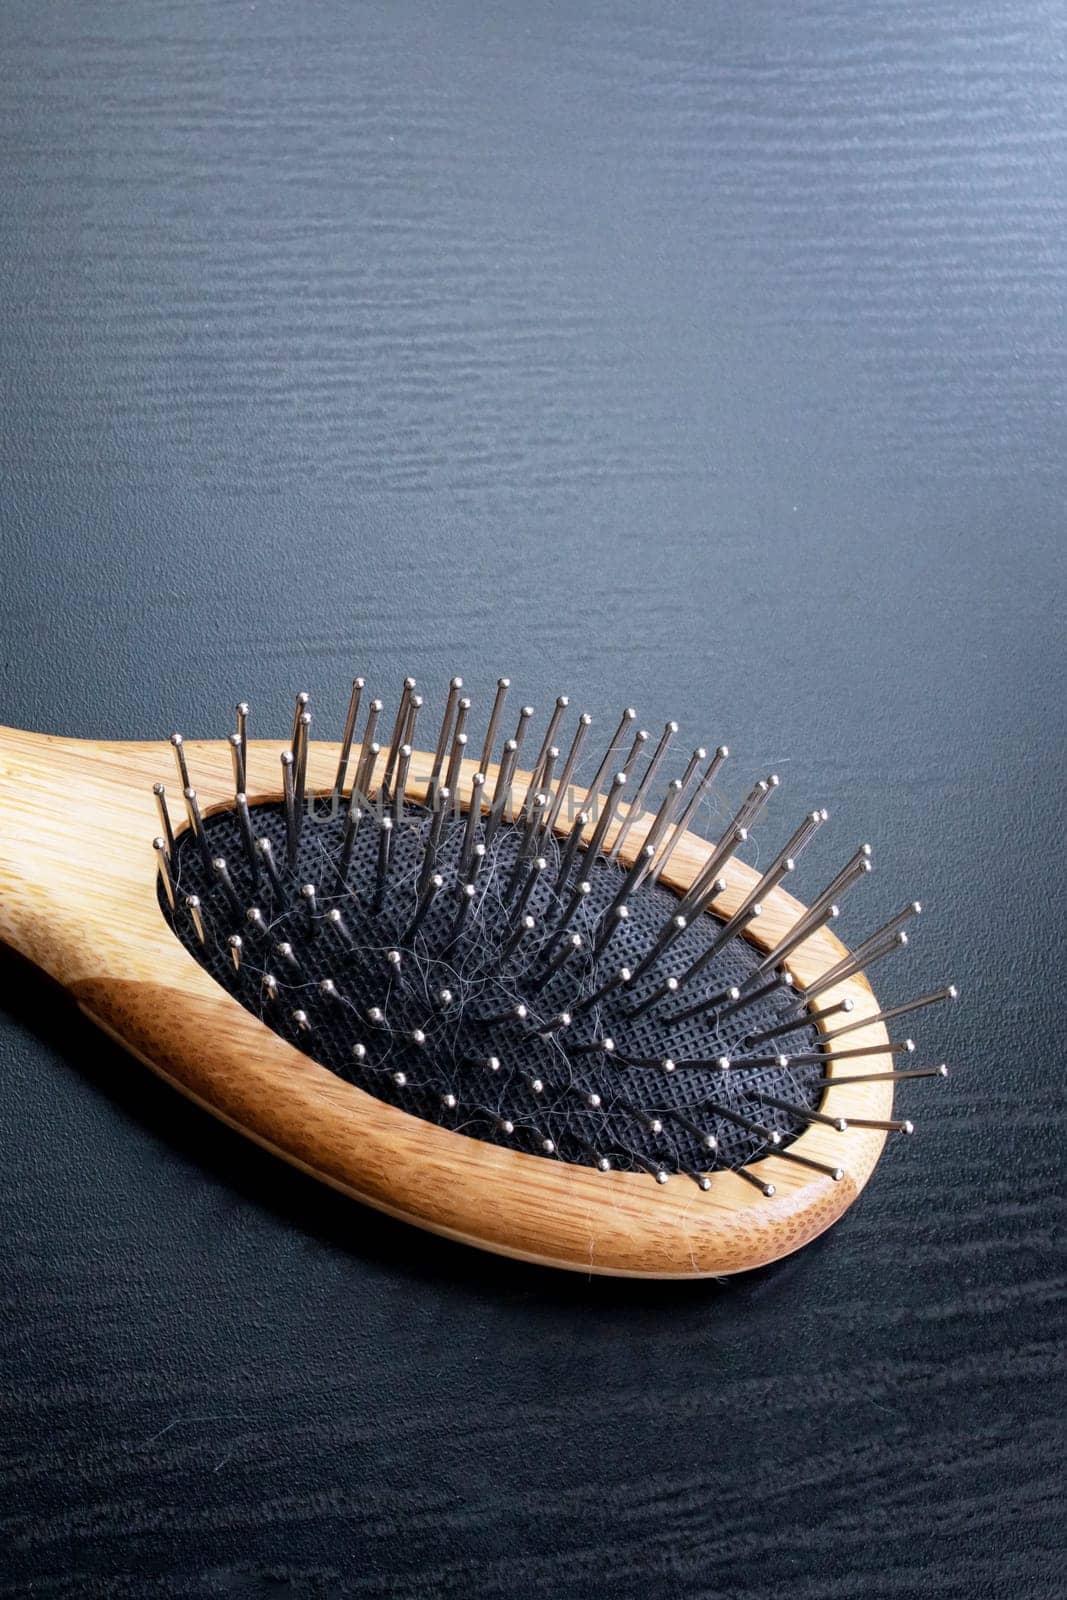 Wooden comb on a black background close up